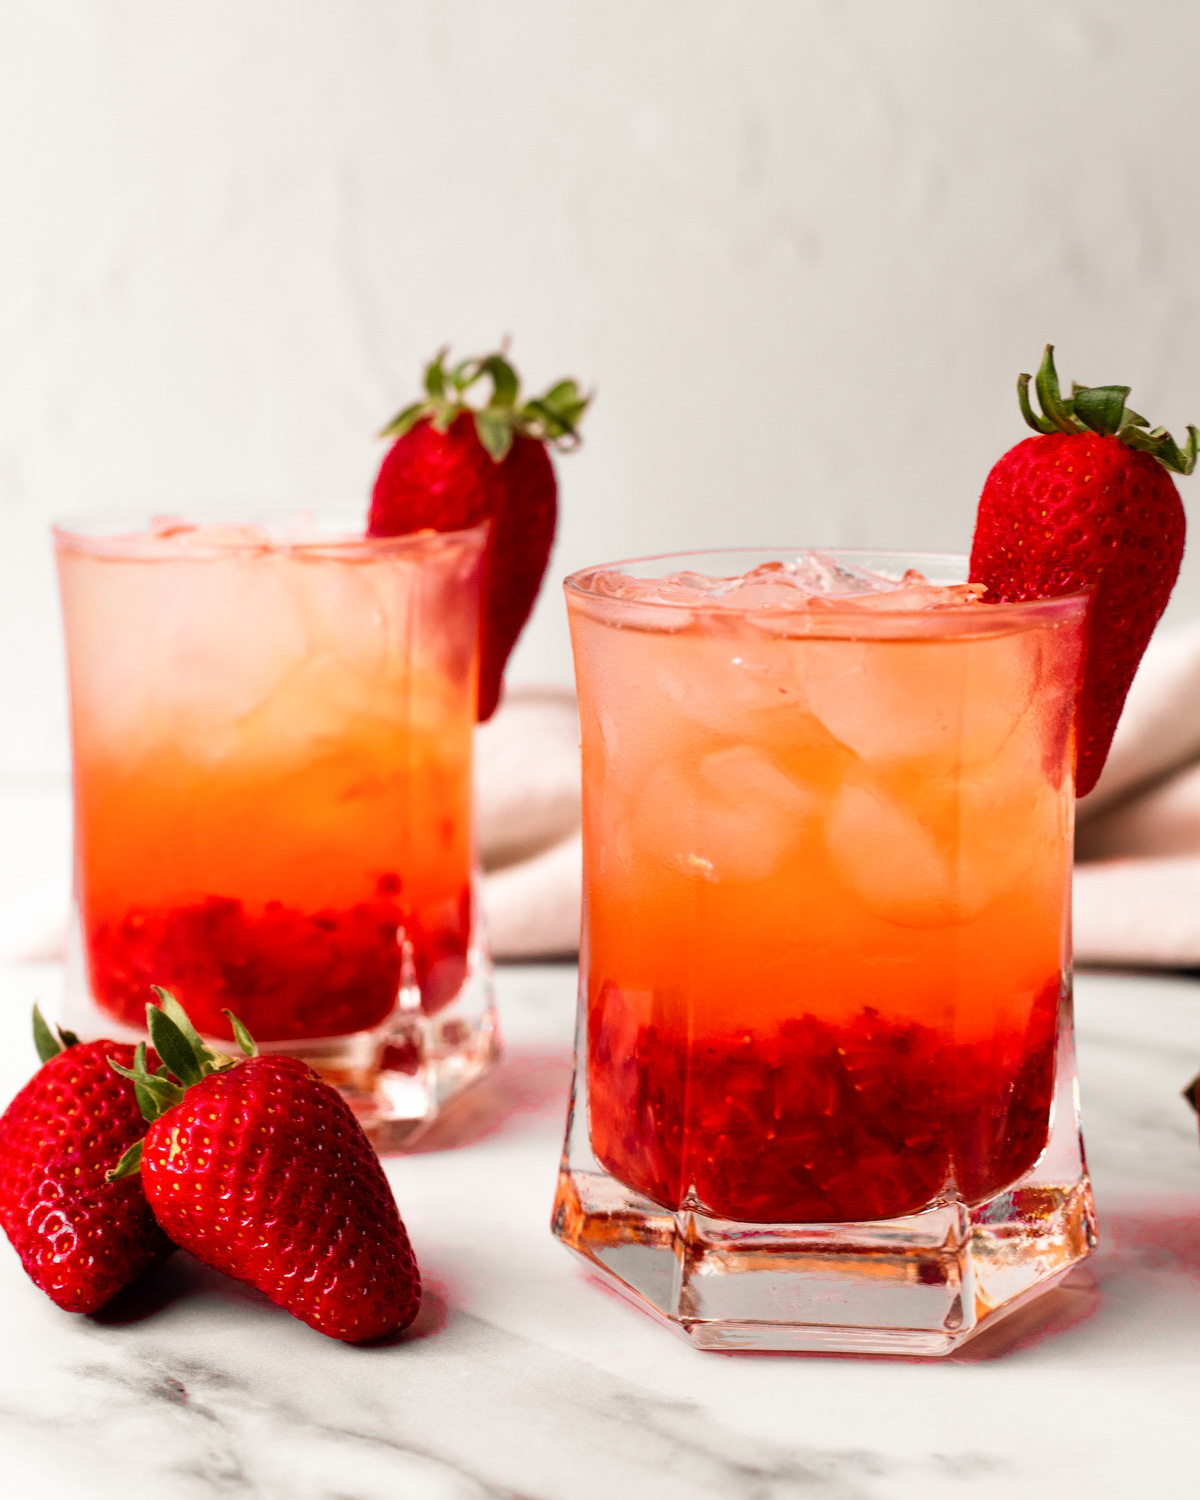 A side shot of two glasses of strawberry rose cocktail with strawberries on the side of the classes.